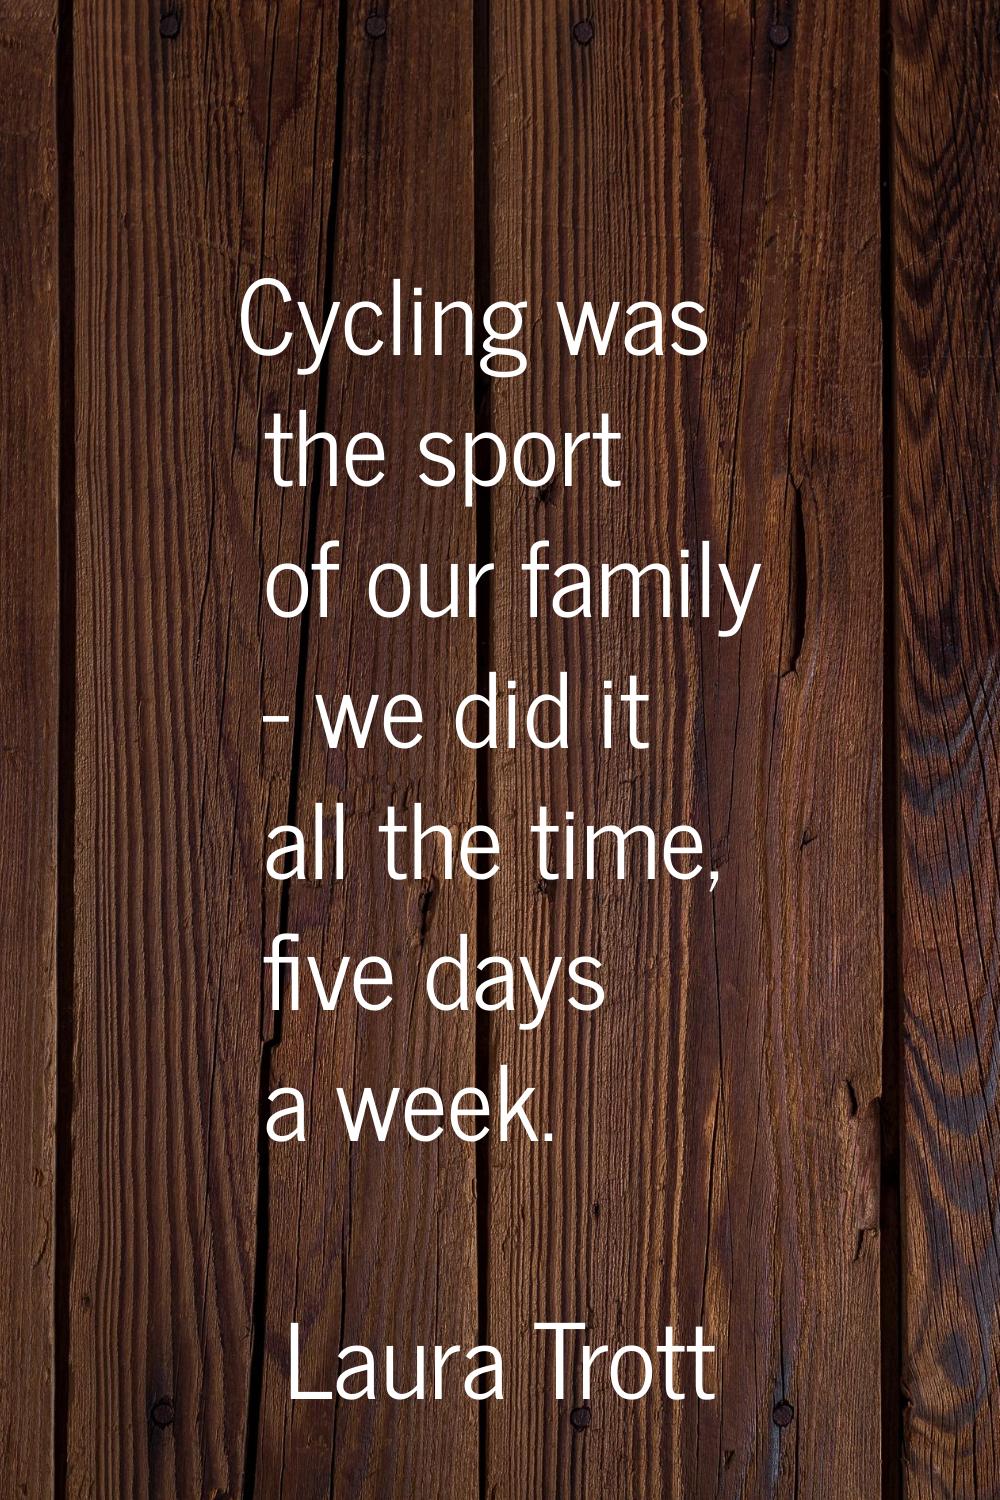 Cycling was the sport of our family - we did it all the time, five days a week.